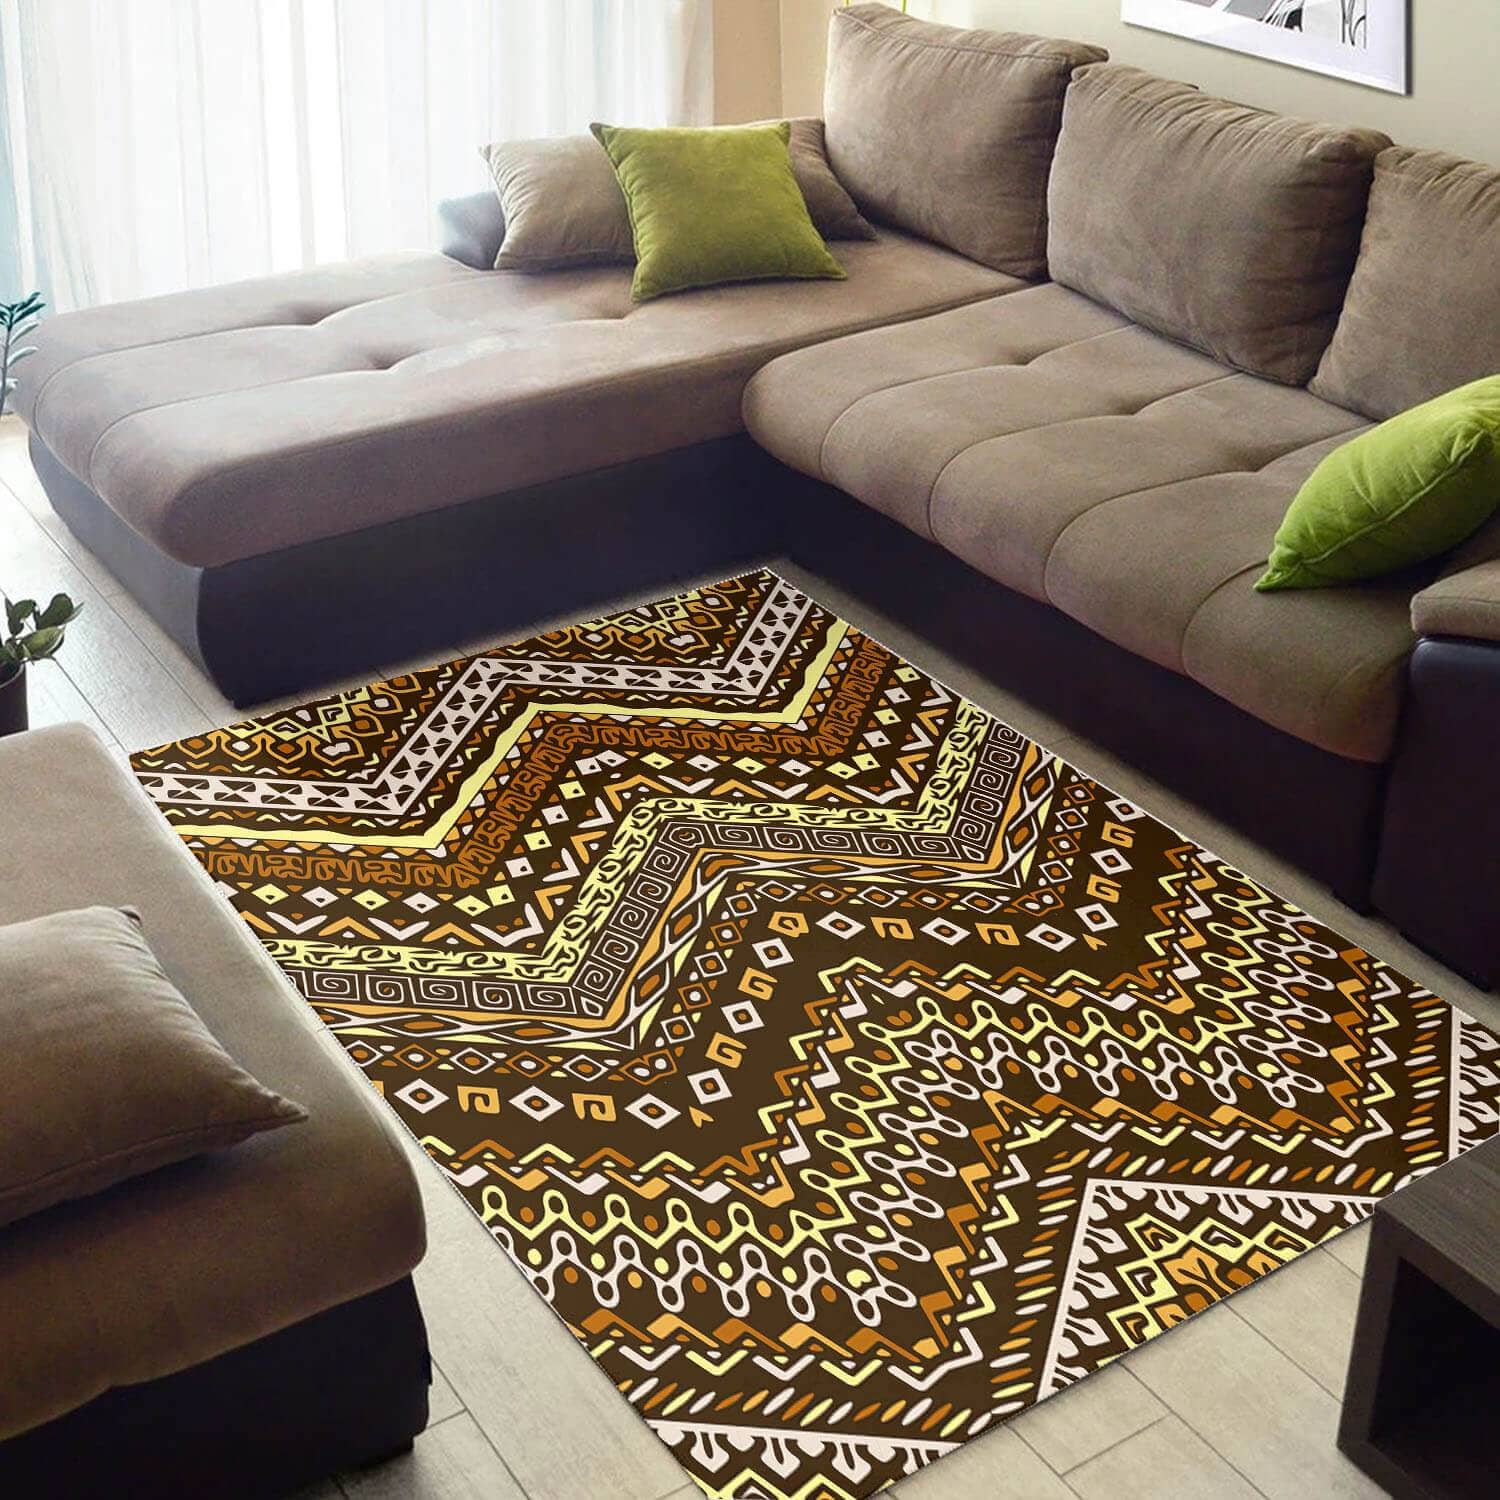 Trendy African Abstract Inspired Seamless Pattern Style Floor House Rug